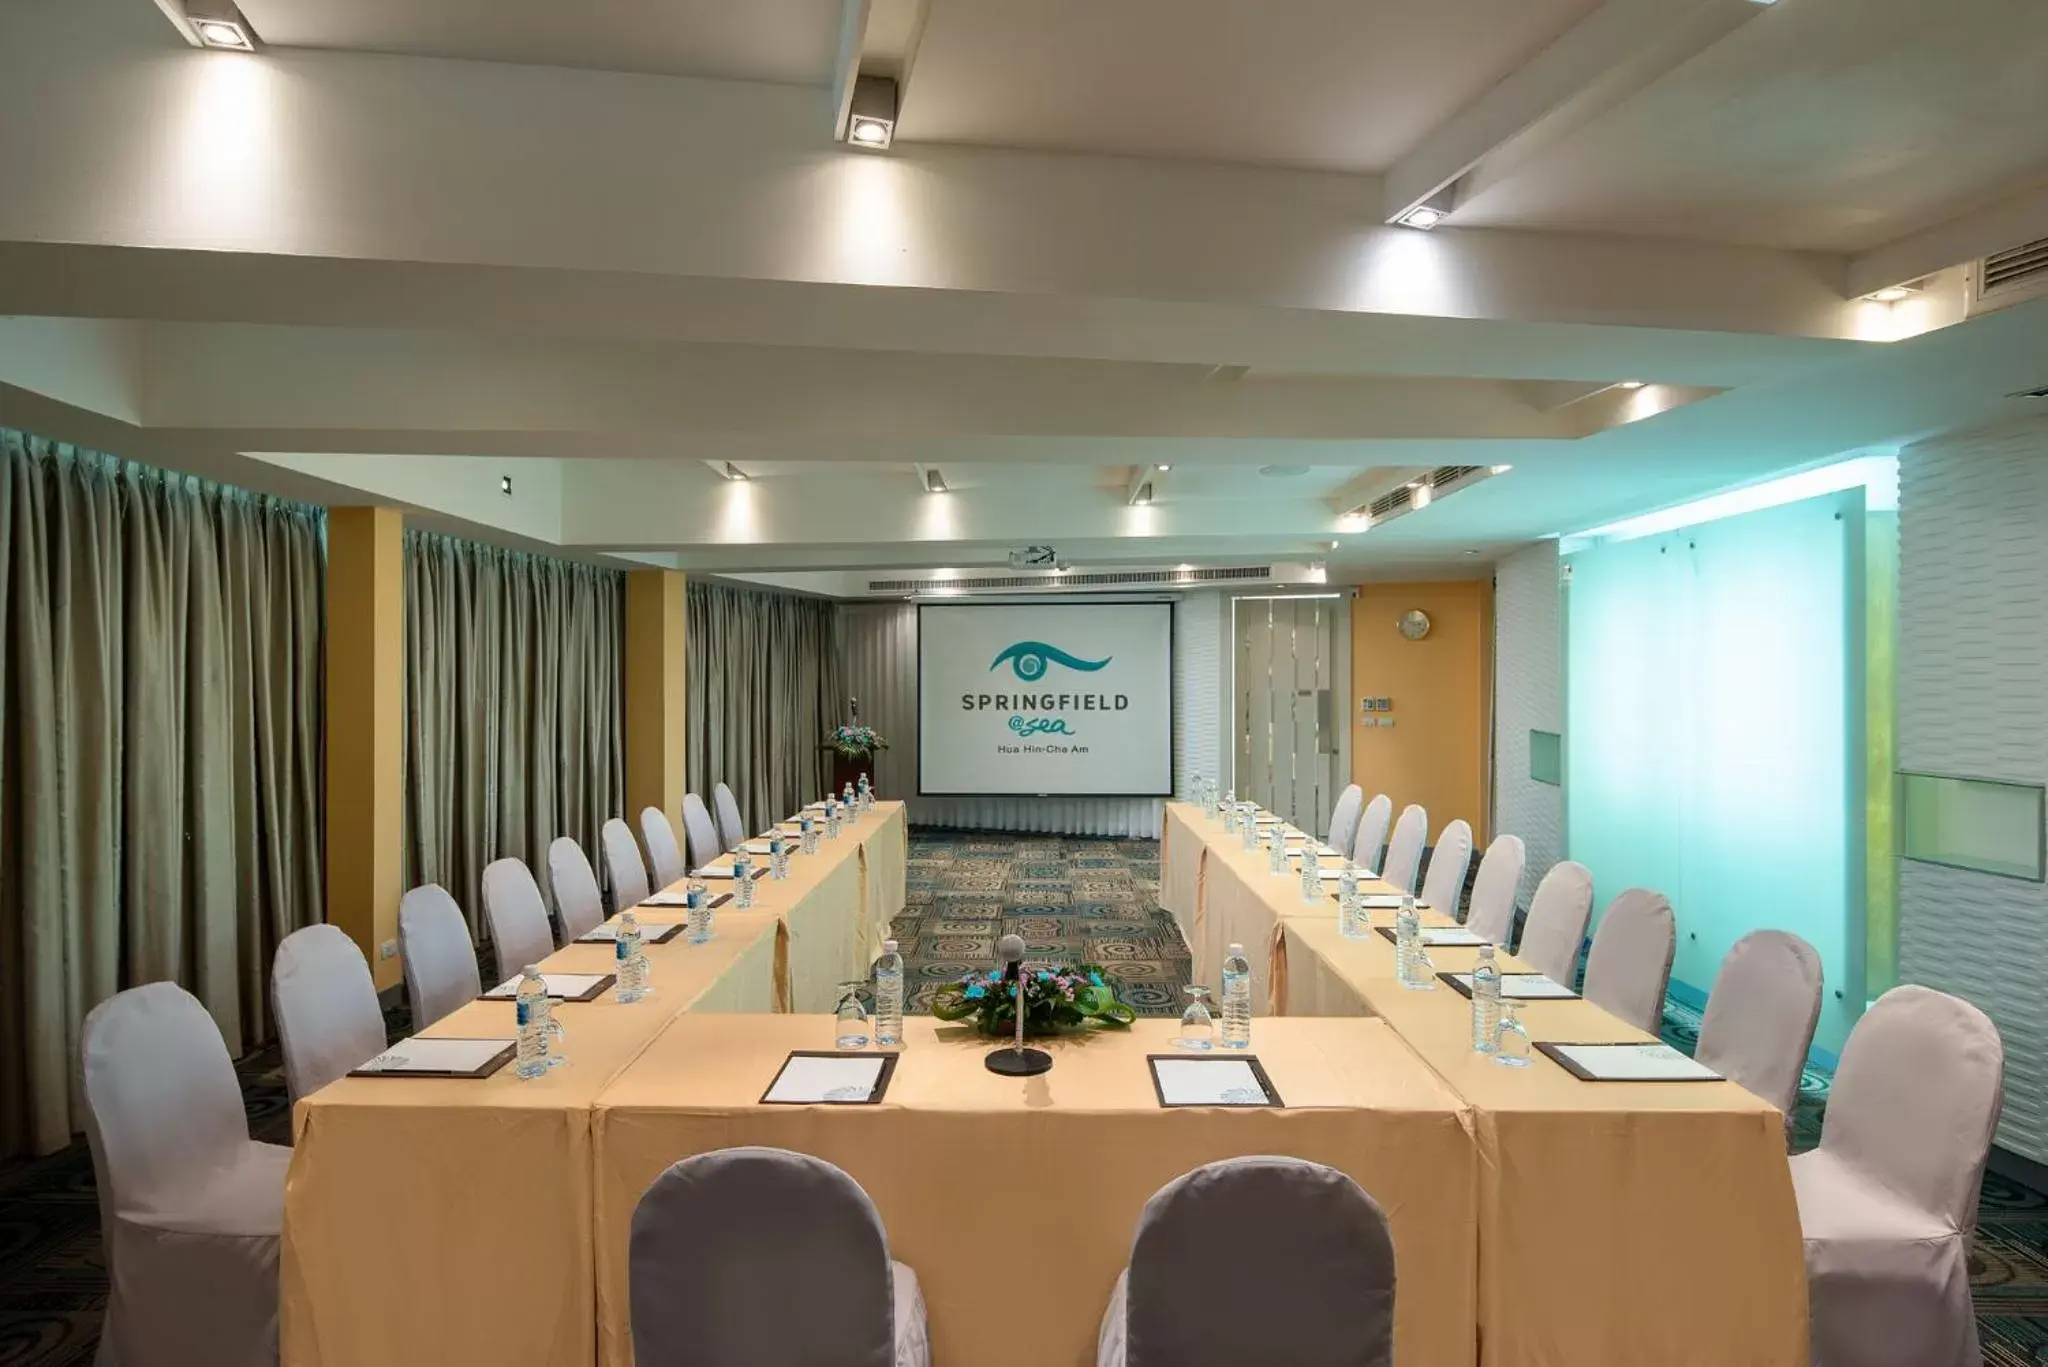 Meeting/conference room in Springfield @Sea Resort & Spa